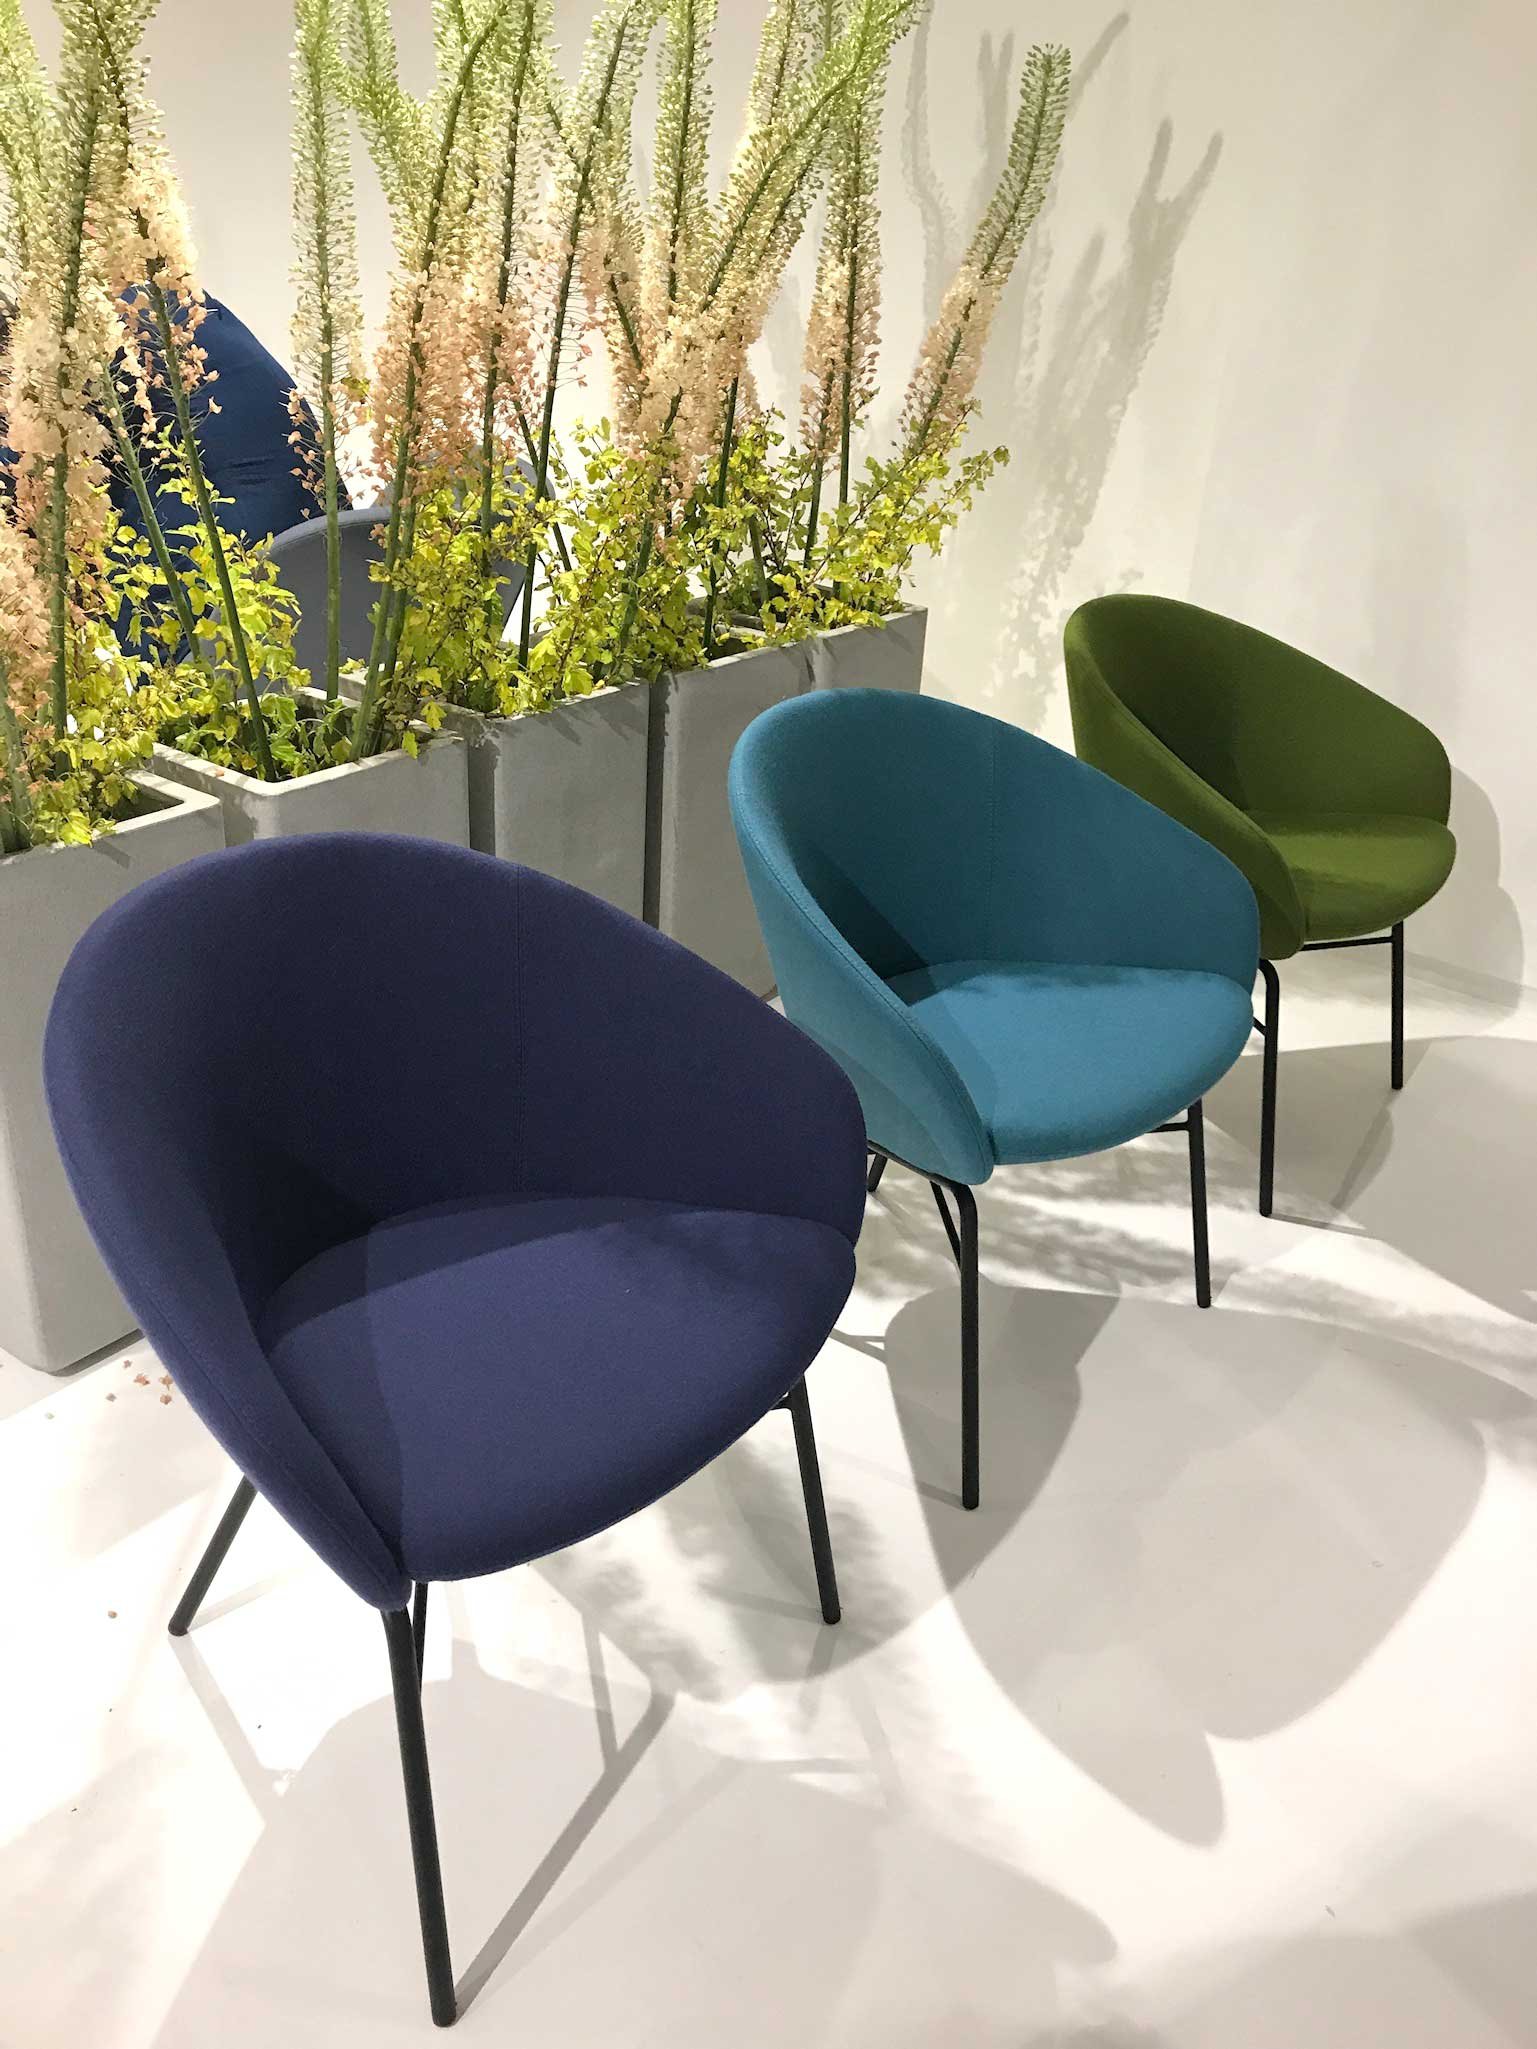 5 Trends We Saw at NeoCon 2018 from Unisource Solutions - 3. streamlined